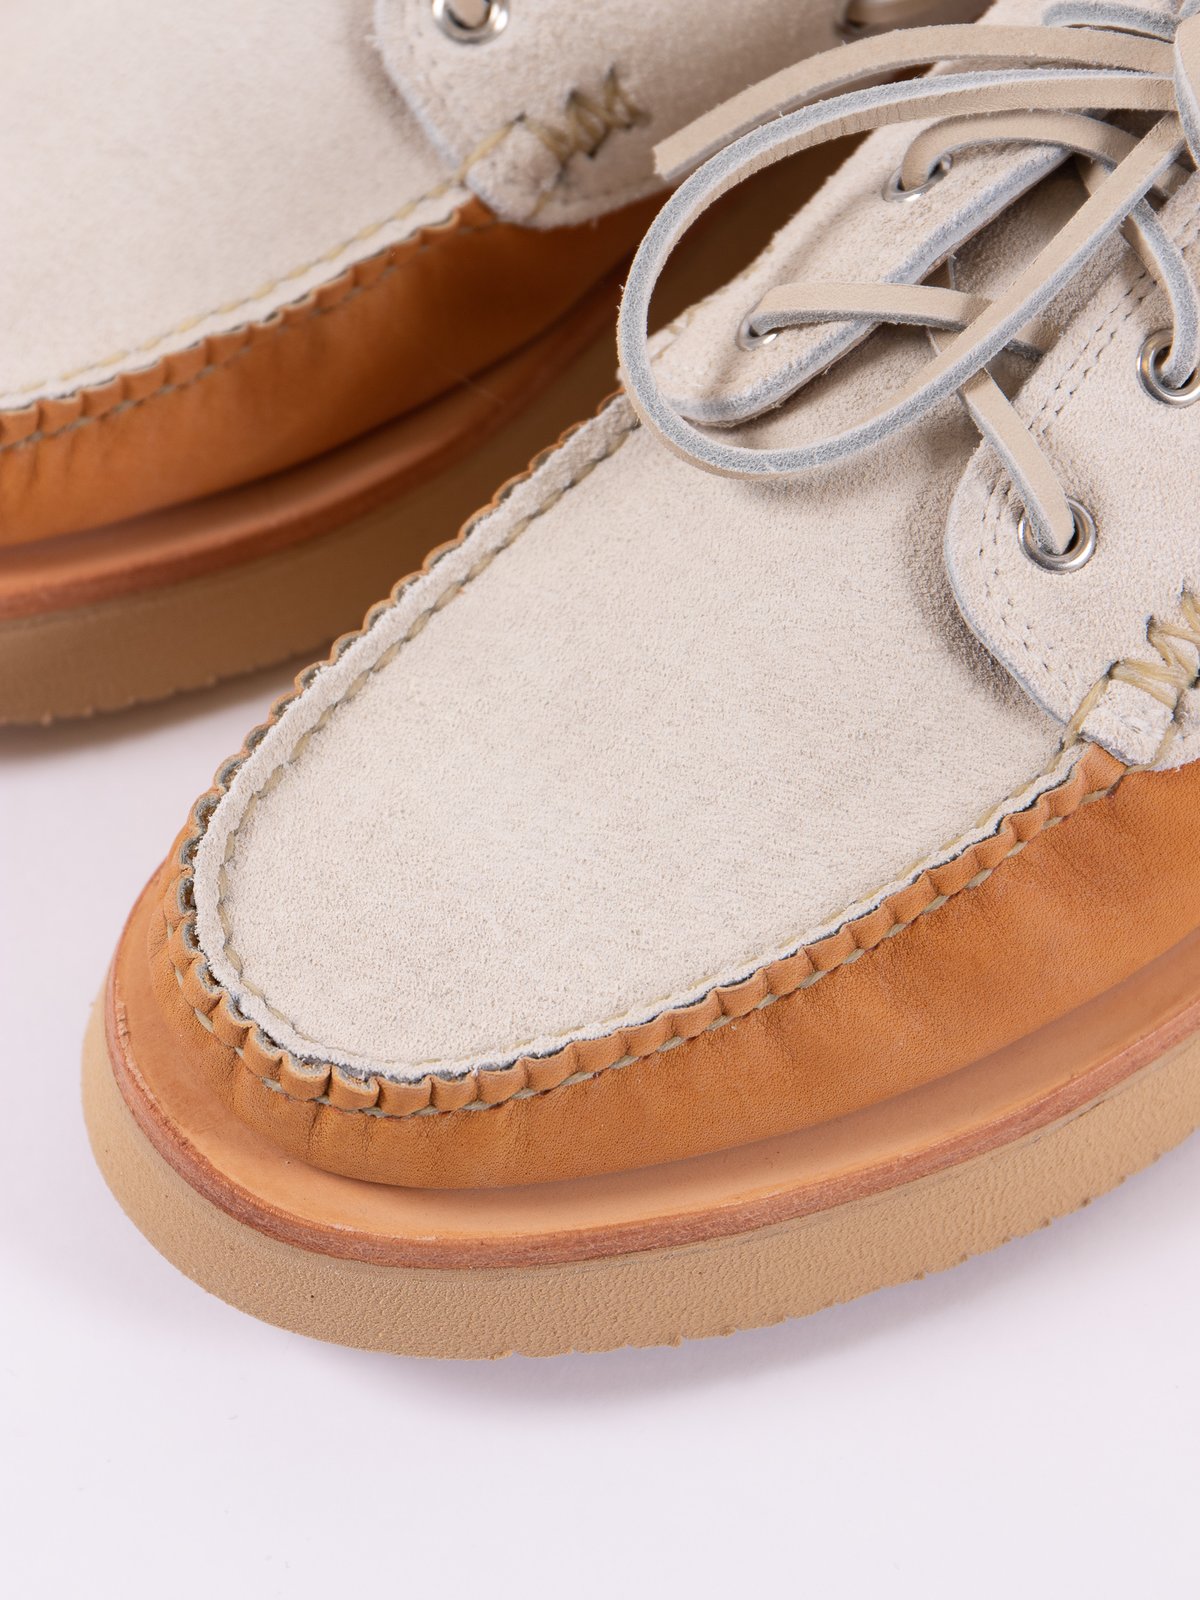 BB Tan/FO White Boat Shoe Exclusive by 